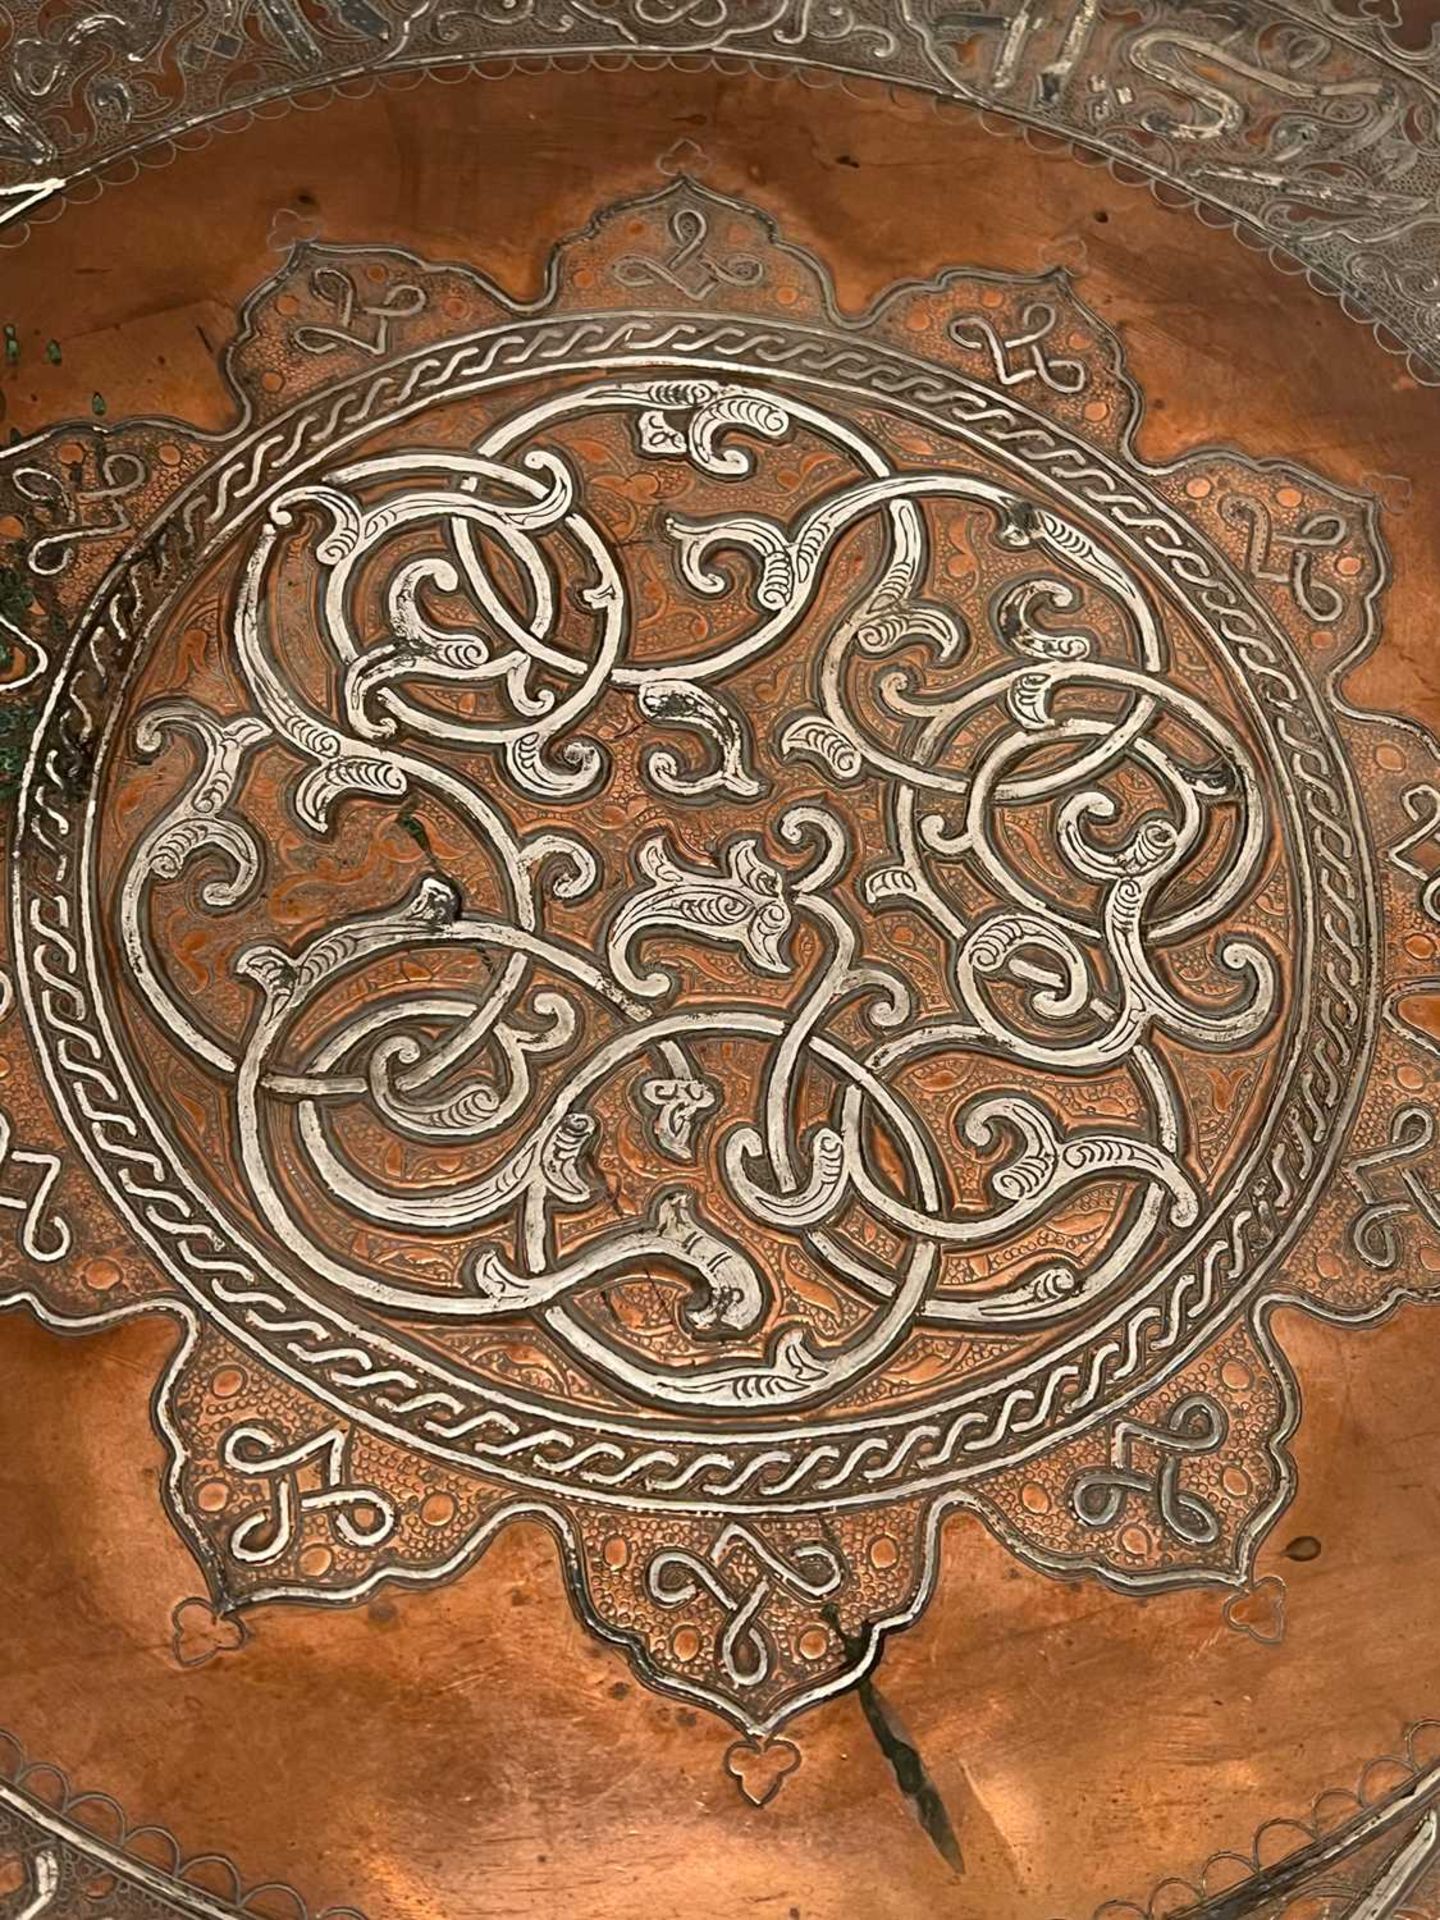 A LARGE 19TH CENTURY CAIROWARE COPPER AND SILVERED METAL INLAID TRAY - Image 3 of 3